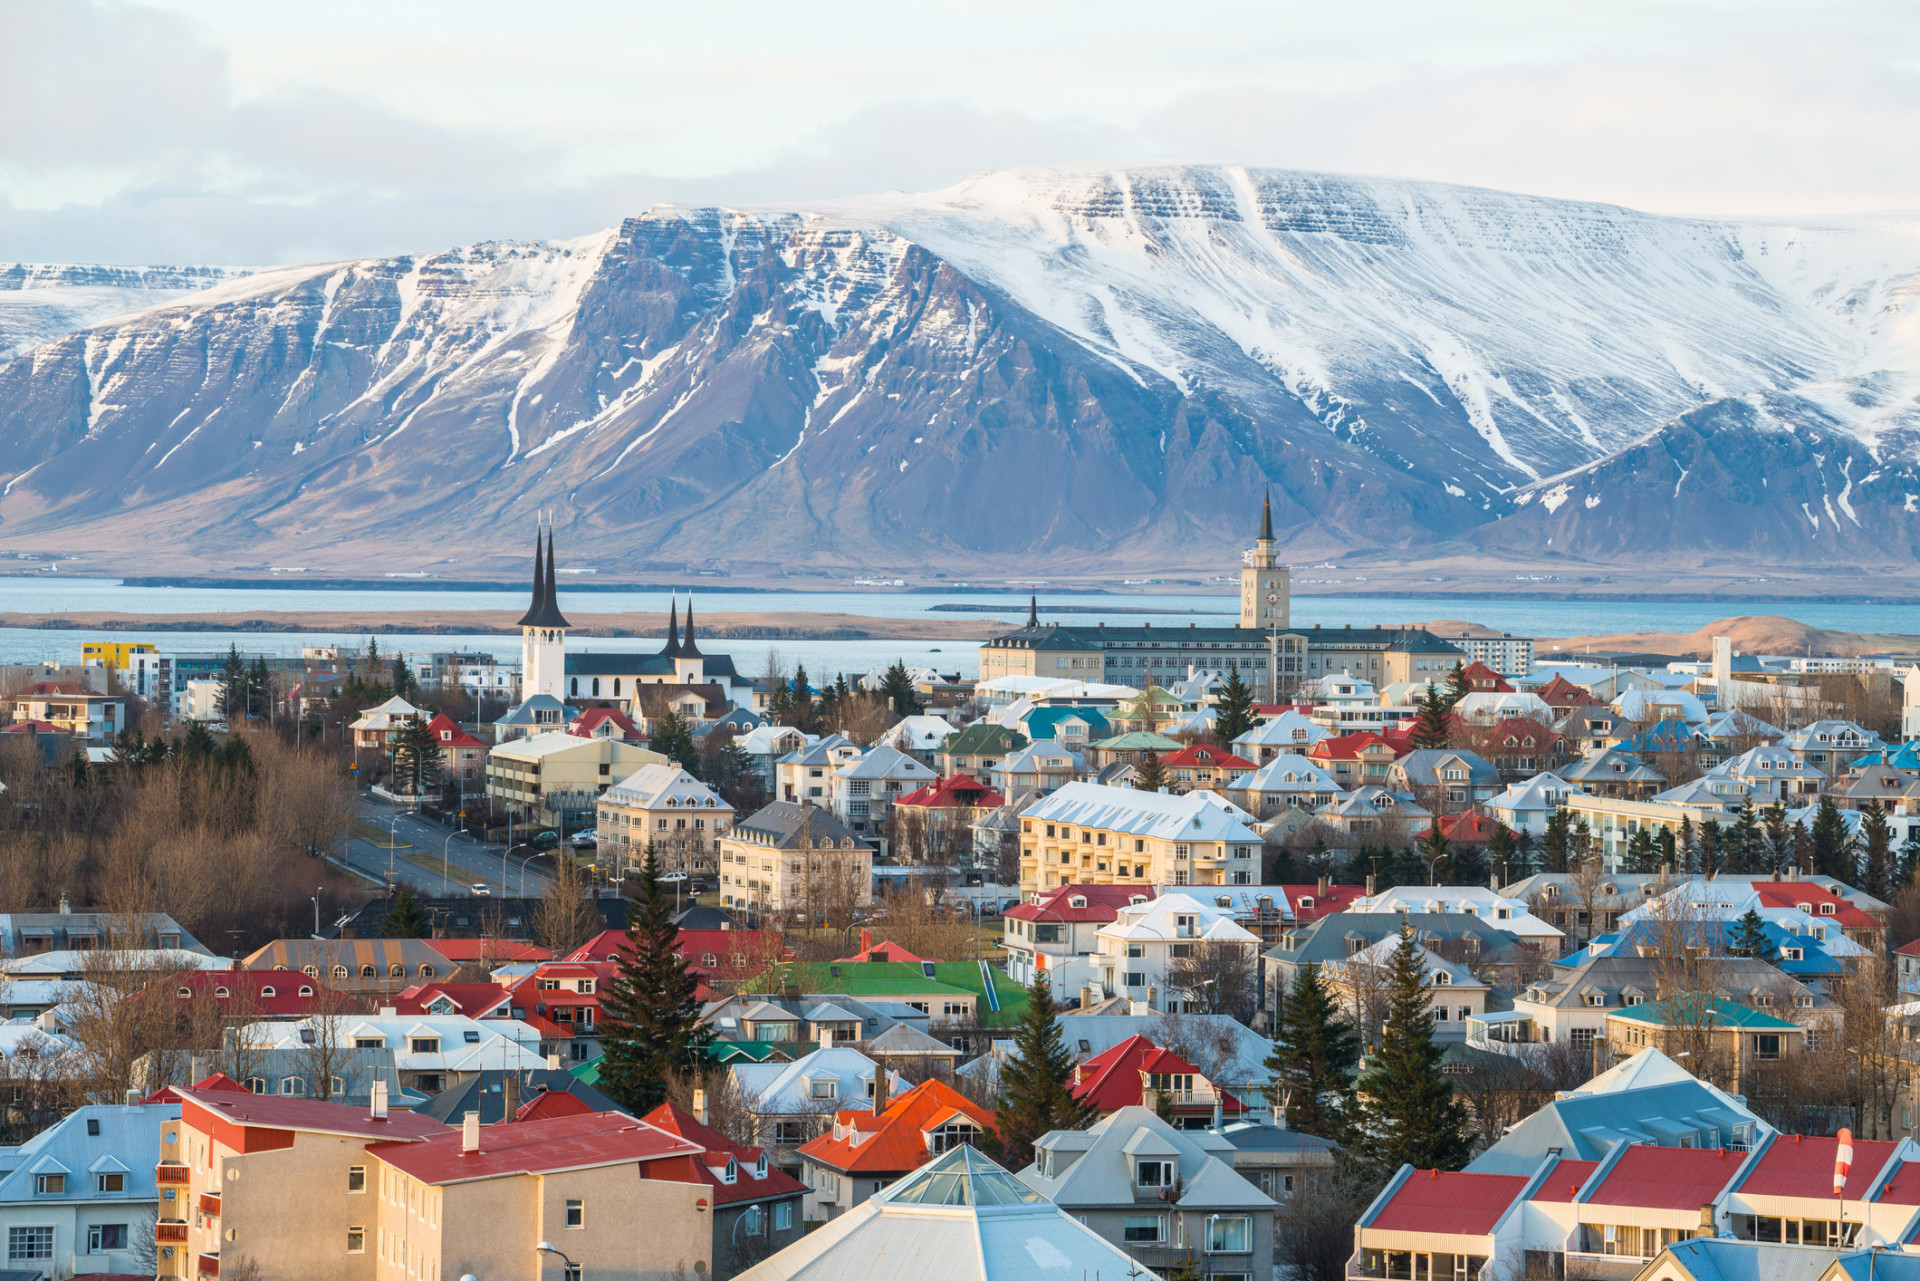 The Icelandic capital is ideal for those who love city life as much as nature. From countless green spaces, to the aurora borealis, to hot water springs, to a modern capital with all the amenities. Reykjavik has it all.<p>You may also like:<a href="https://www.starsinsider.com/n/444881?utm_source=msn.com&utm_medium=display&utm_campaign=referral_description&utm_content=659557en-ie"> Celebrities discuss the dark side of fame</a></p>